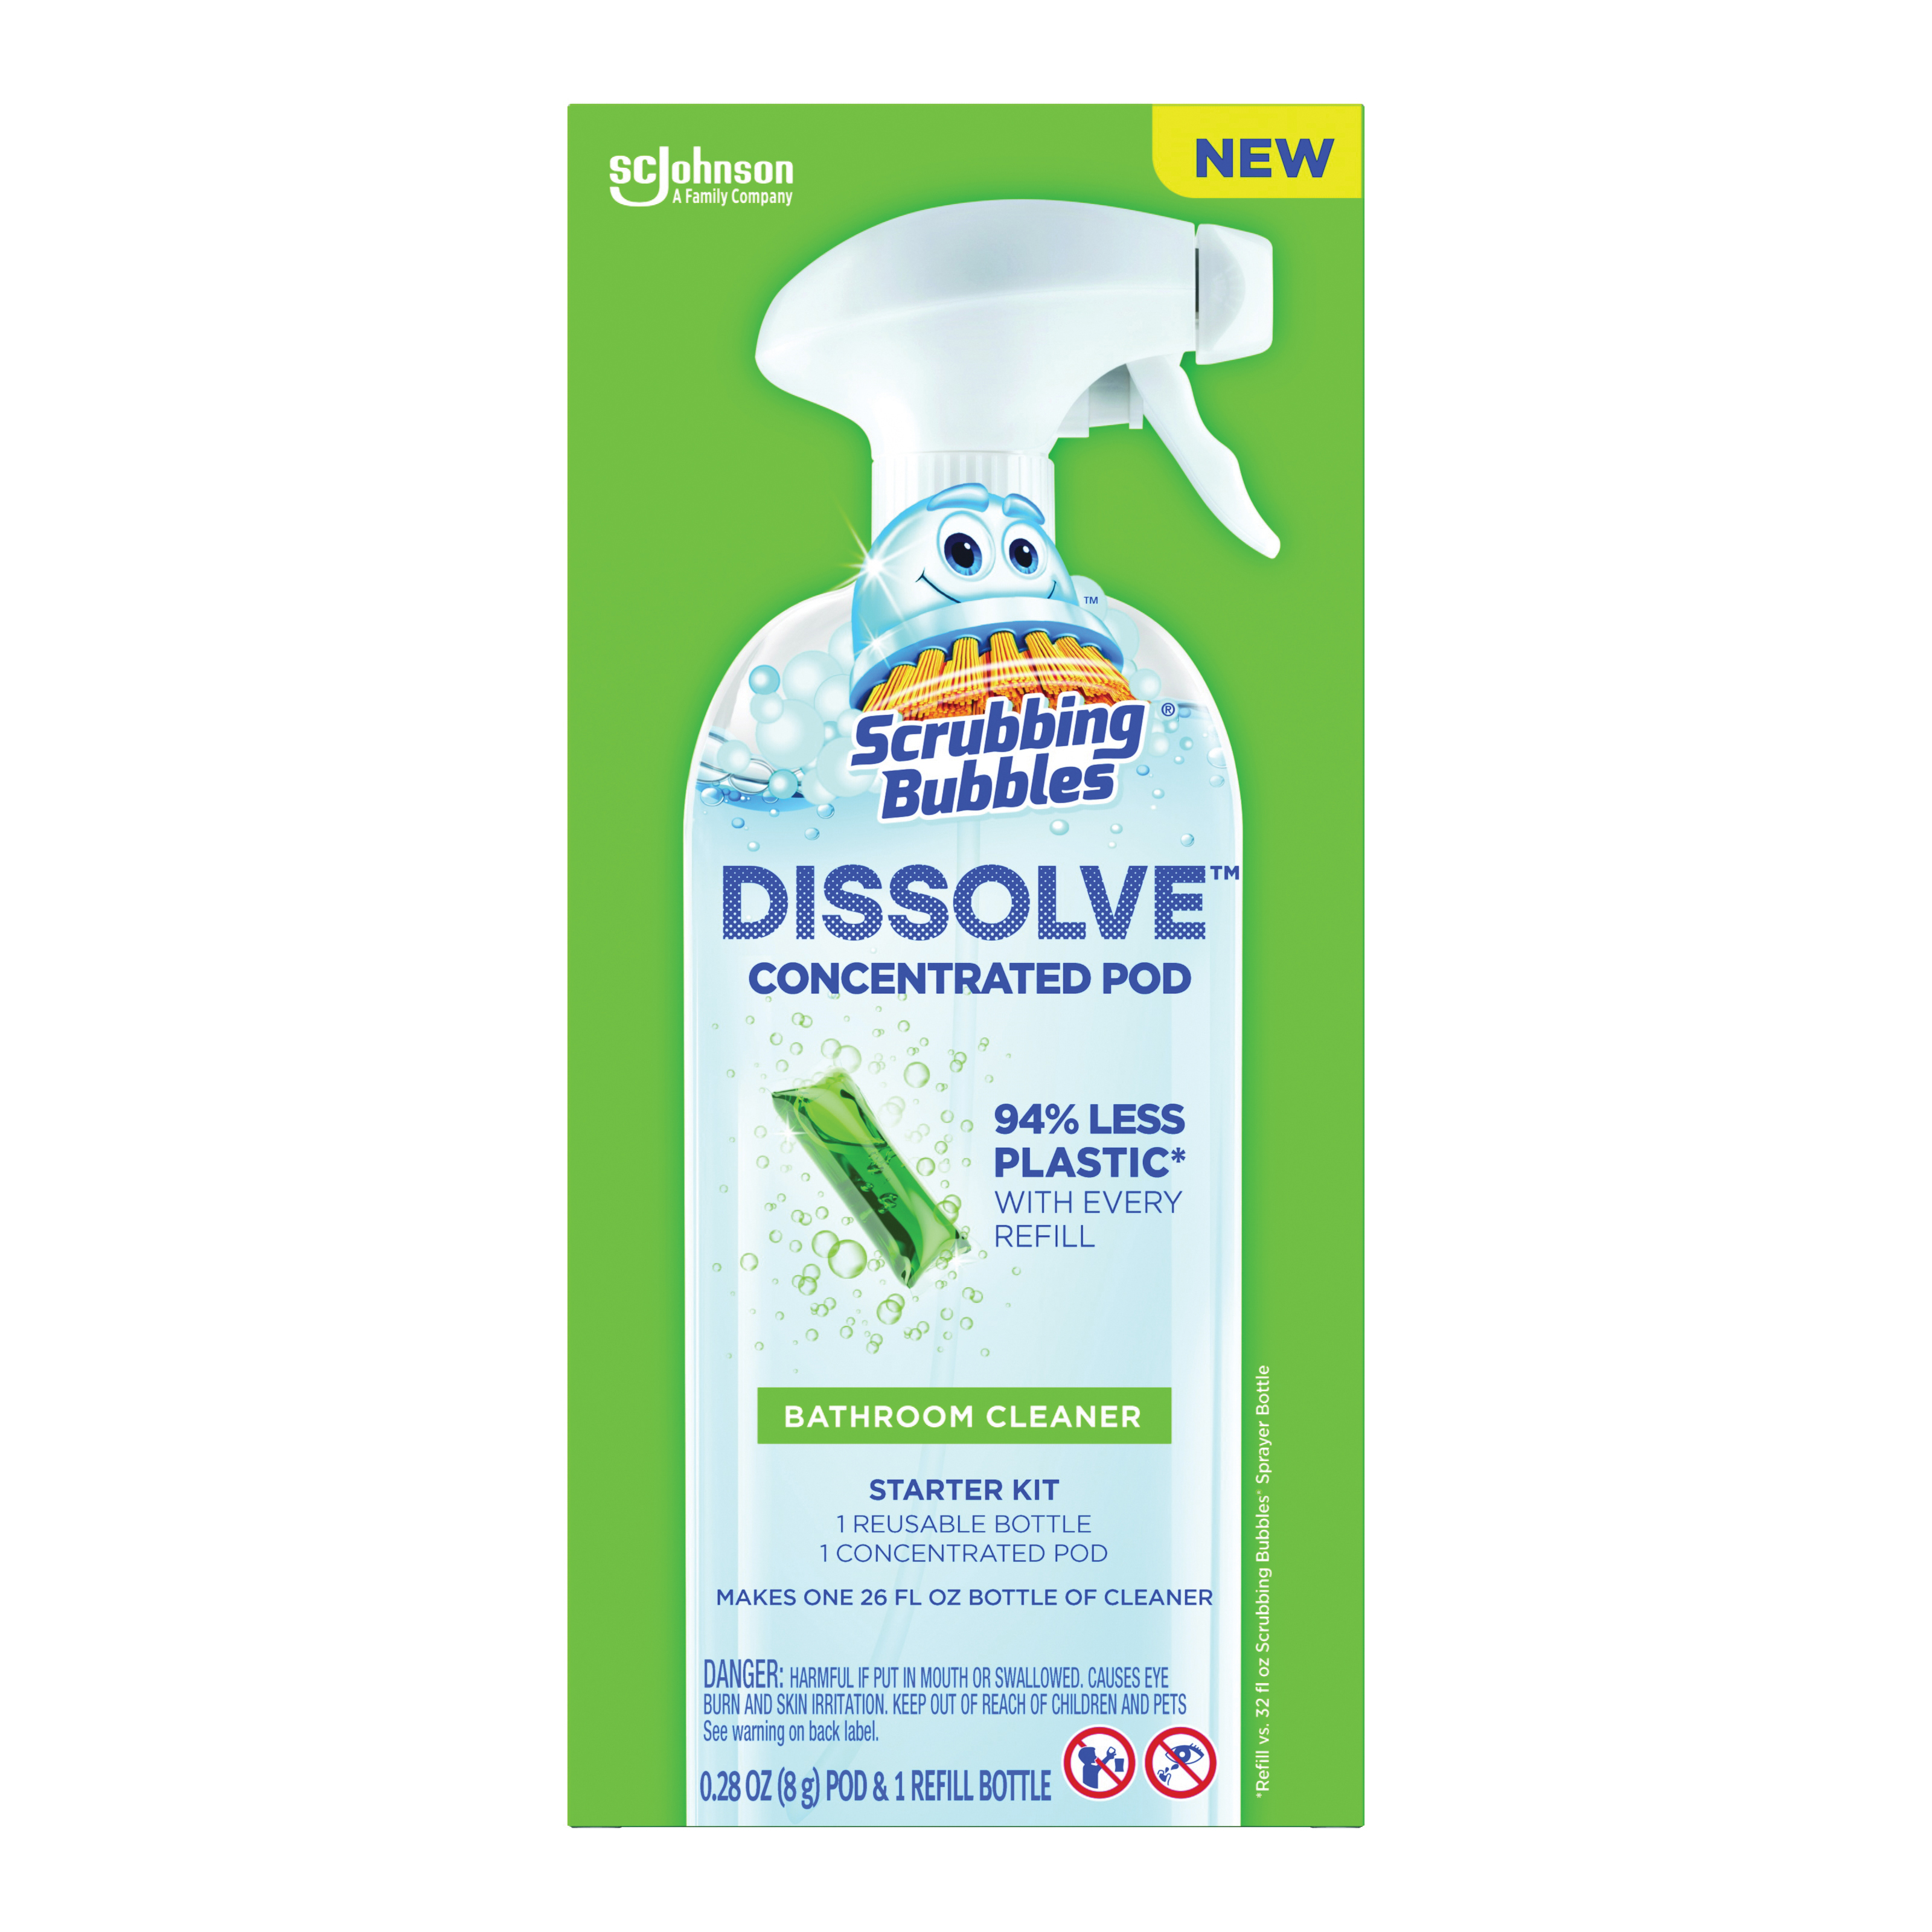 Scrubbing Bubbles Dissolve 00046 Concentrated Bathroom Cleaner Starter Kit, Dissolve Pod, Marine, Ozone, Green Yellow